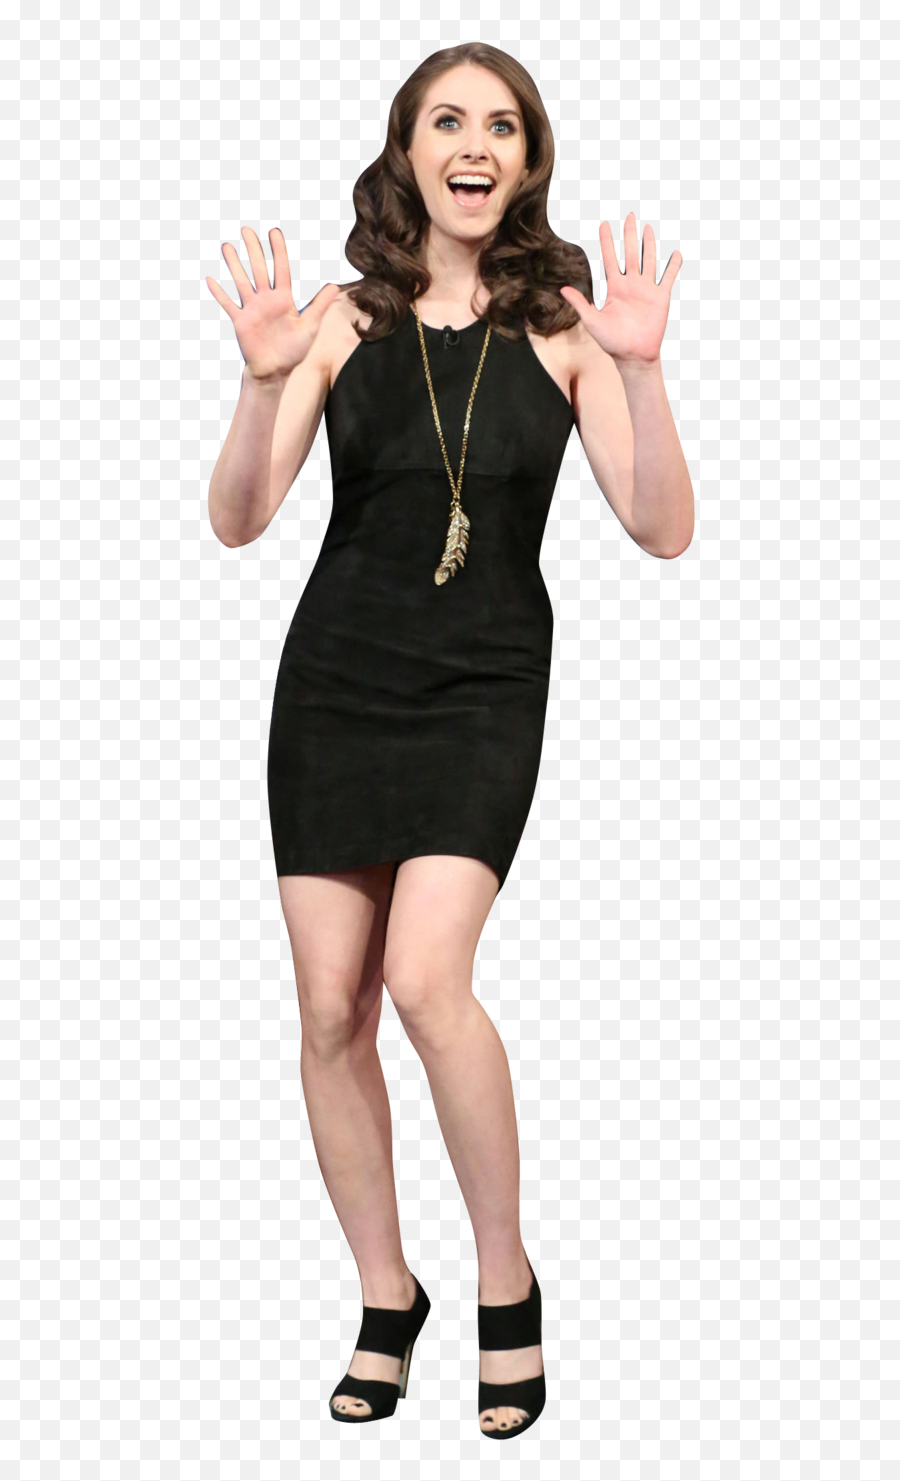 Stock Women Png By Elcesar18 Stock - Female Stock Images Png Emoji,Women Png